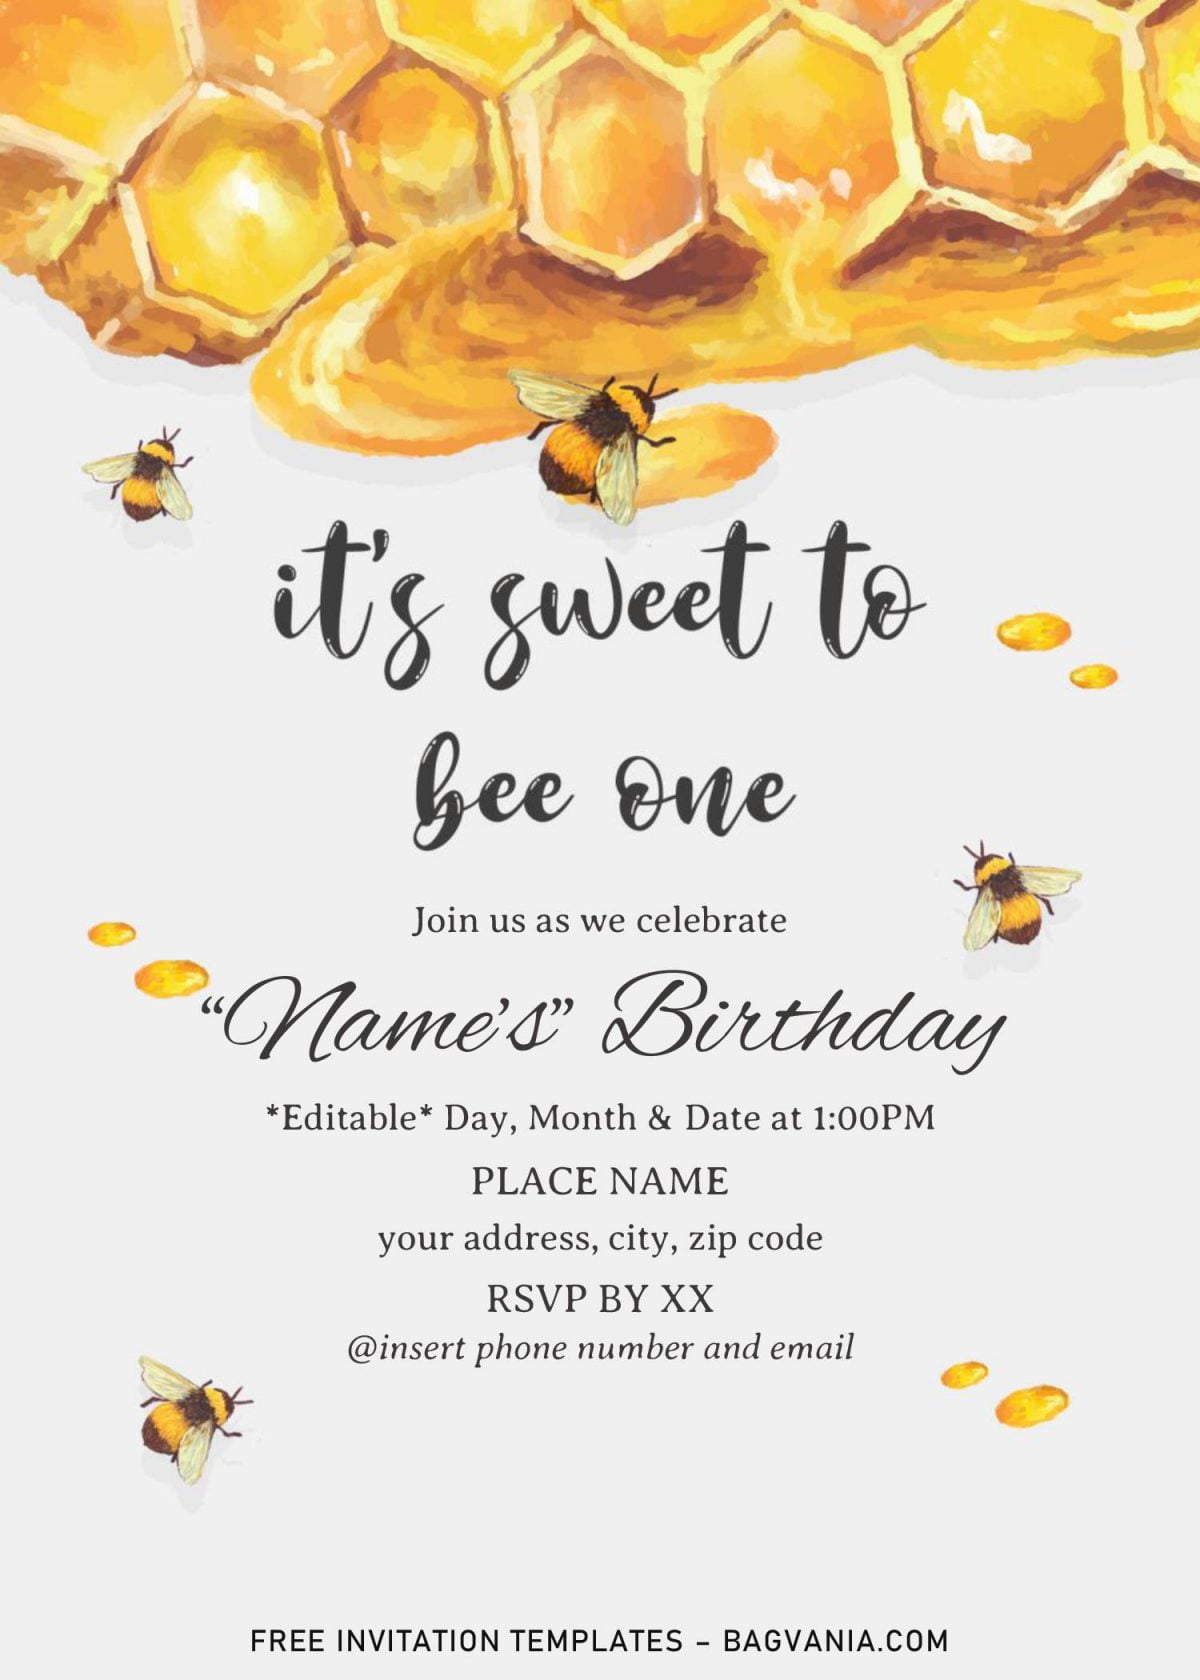 First Bee Day Birthday Invitation Templates - Editable .Docx and has canvas background